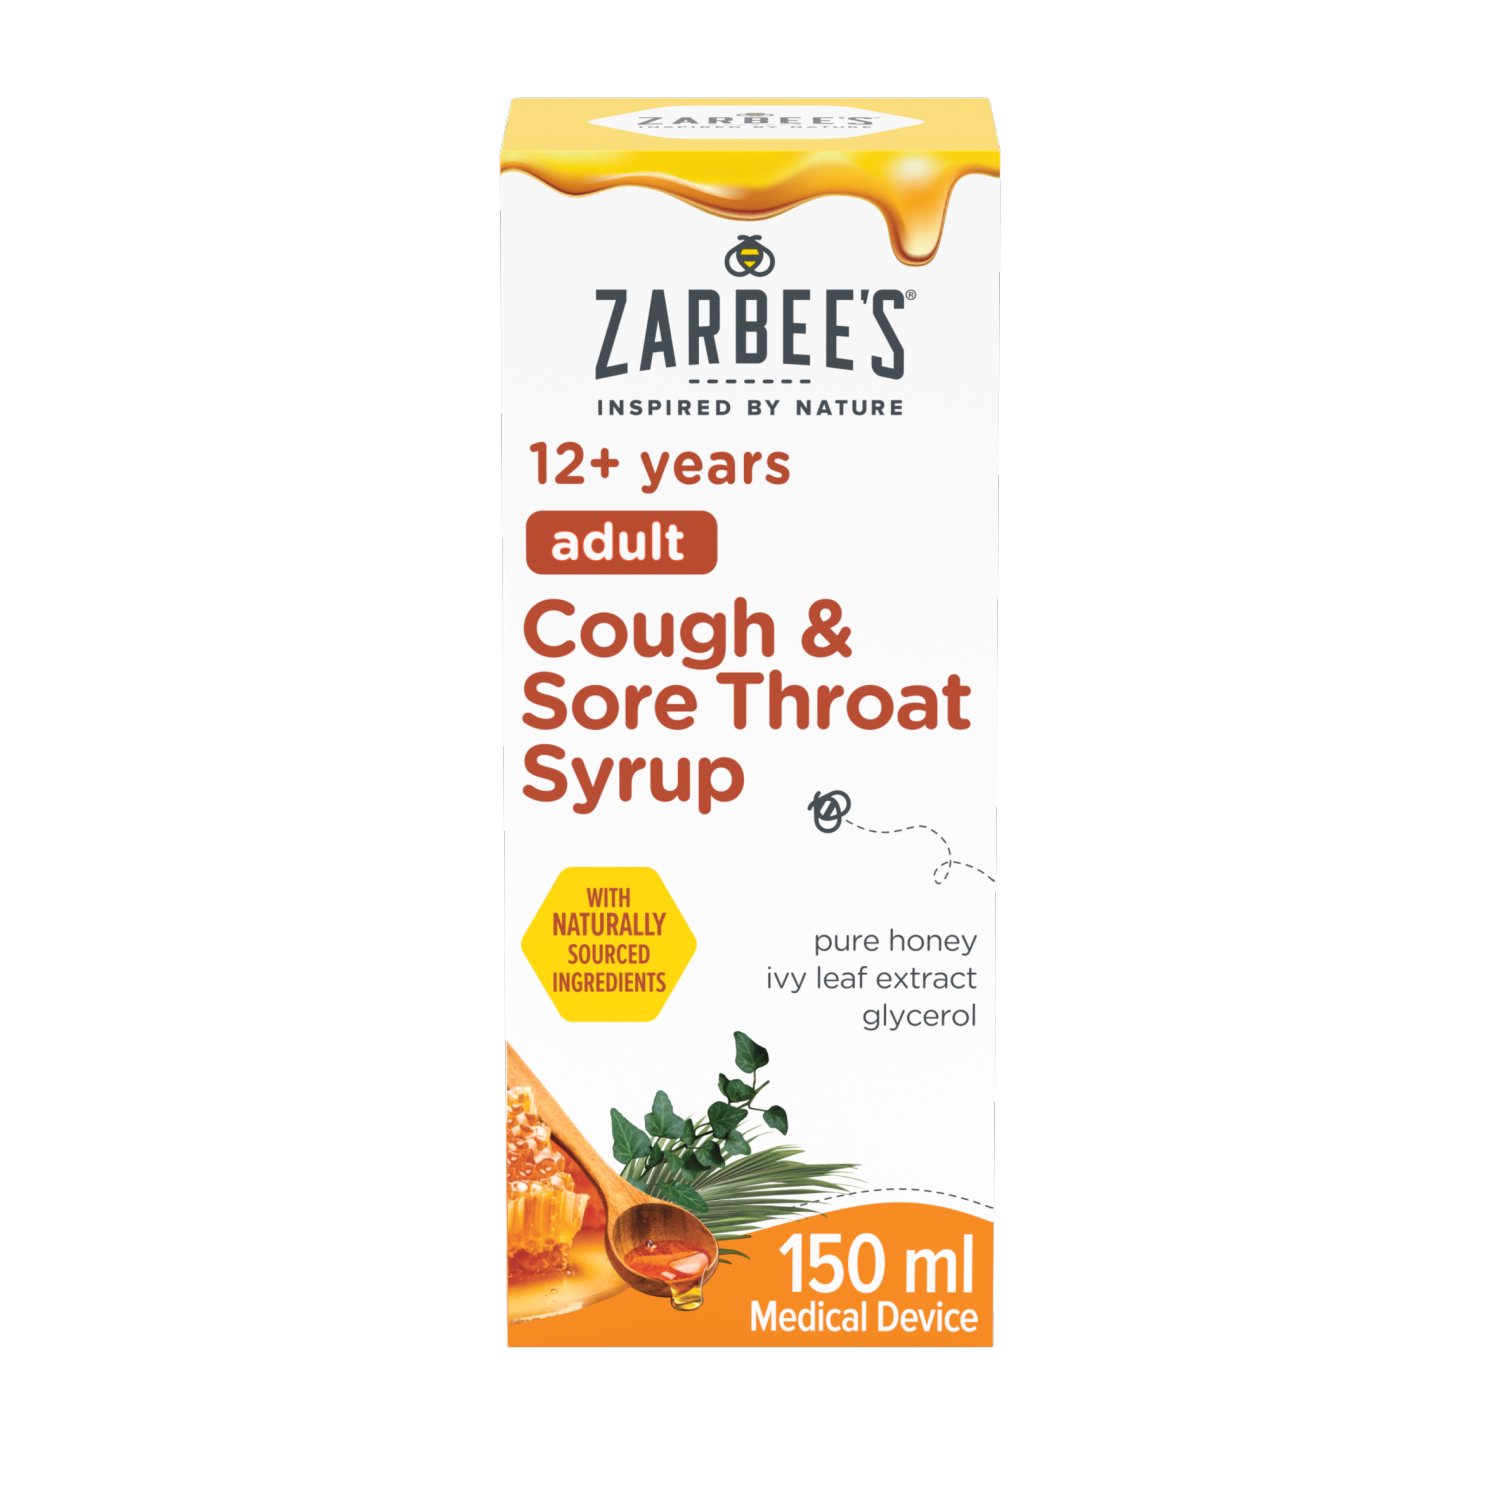 Zarbee's Adult Cough & Sore Throat Syrup (150 ml)